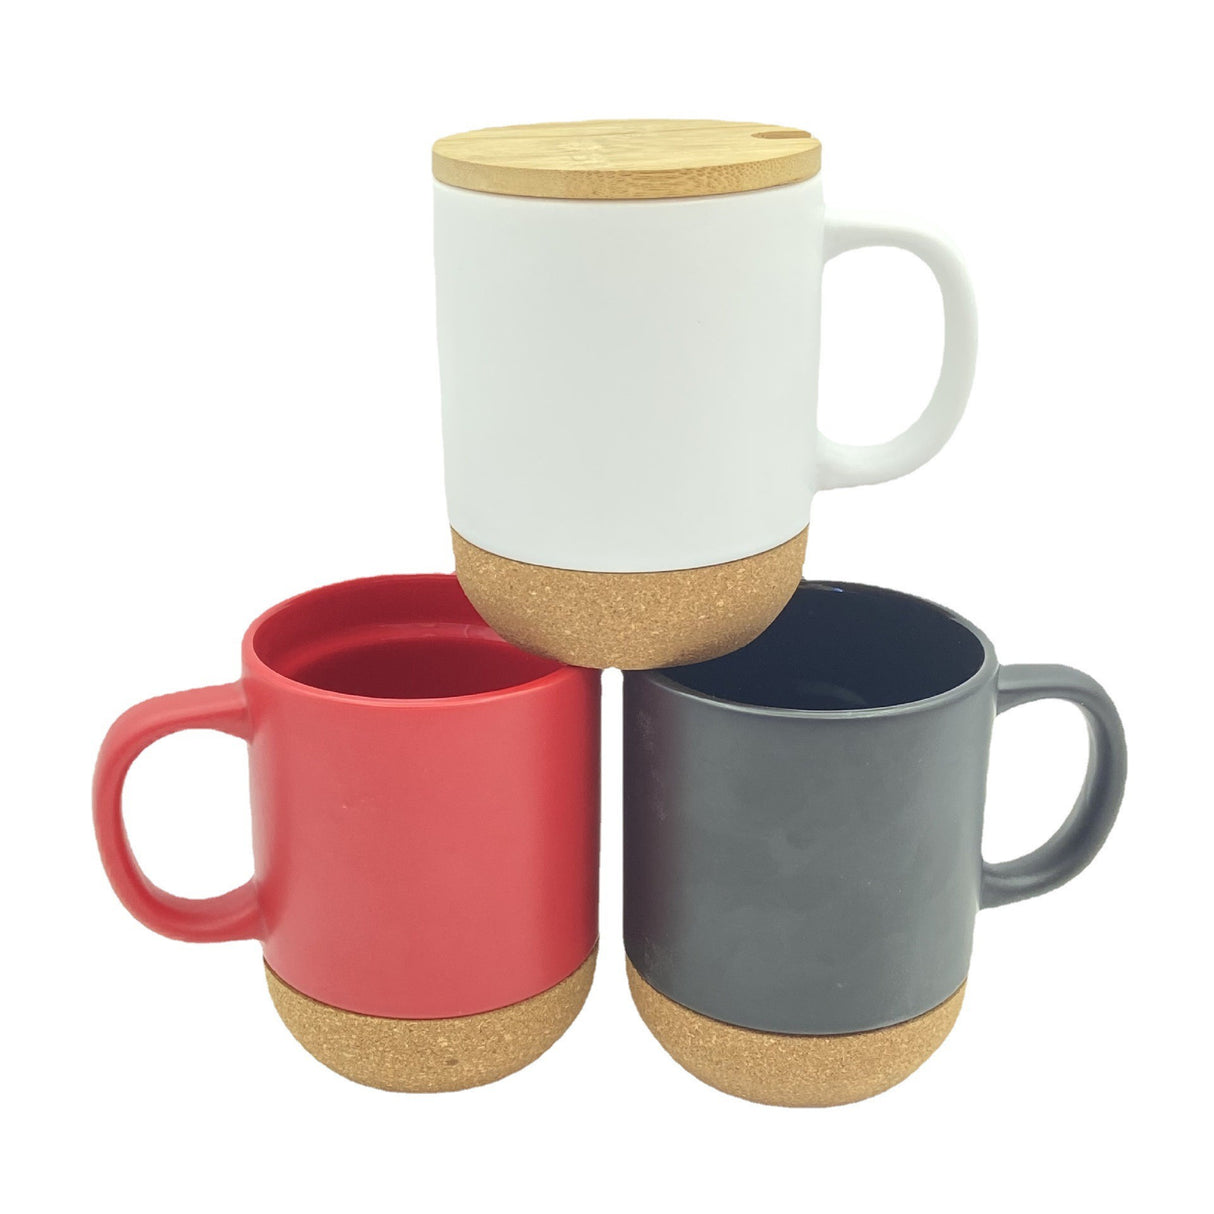 Wooden Bottom Ceramic Cup